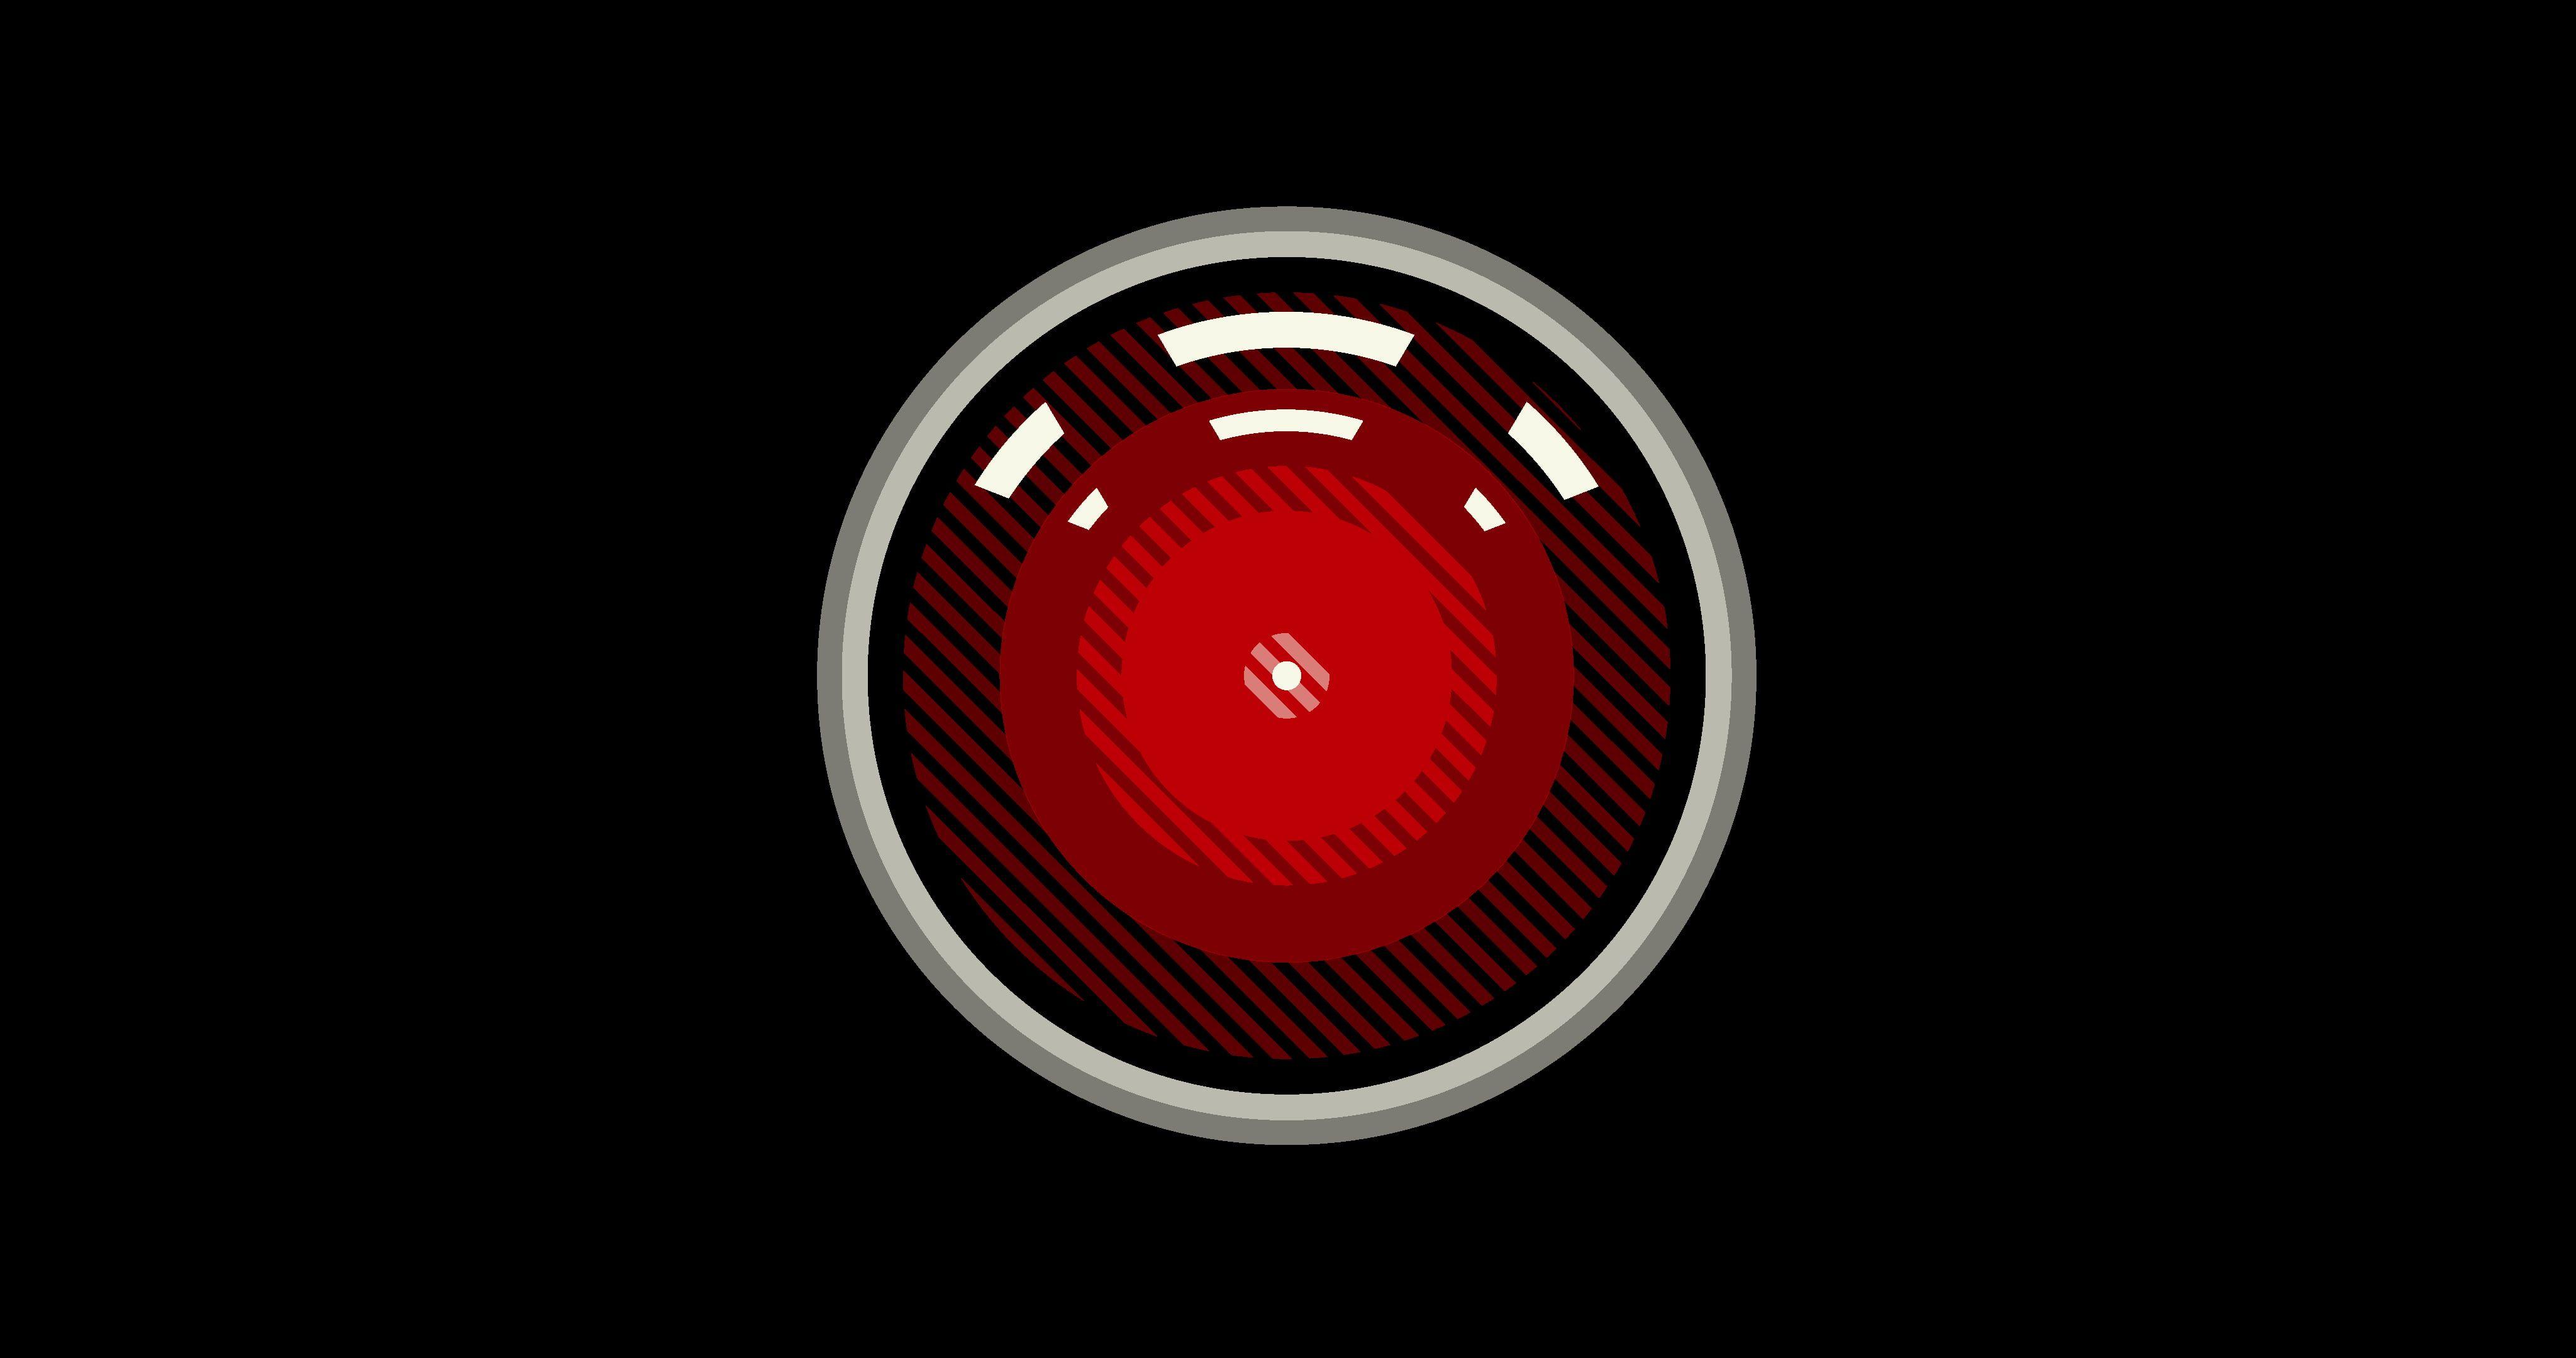 HAL 9000 4K Wallpapers - Top Free HAL 9000 4K Backgrounds - WallpaperAccess